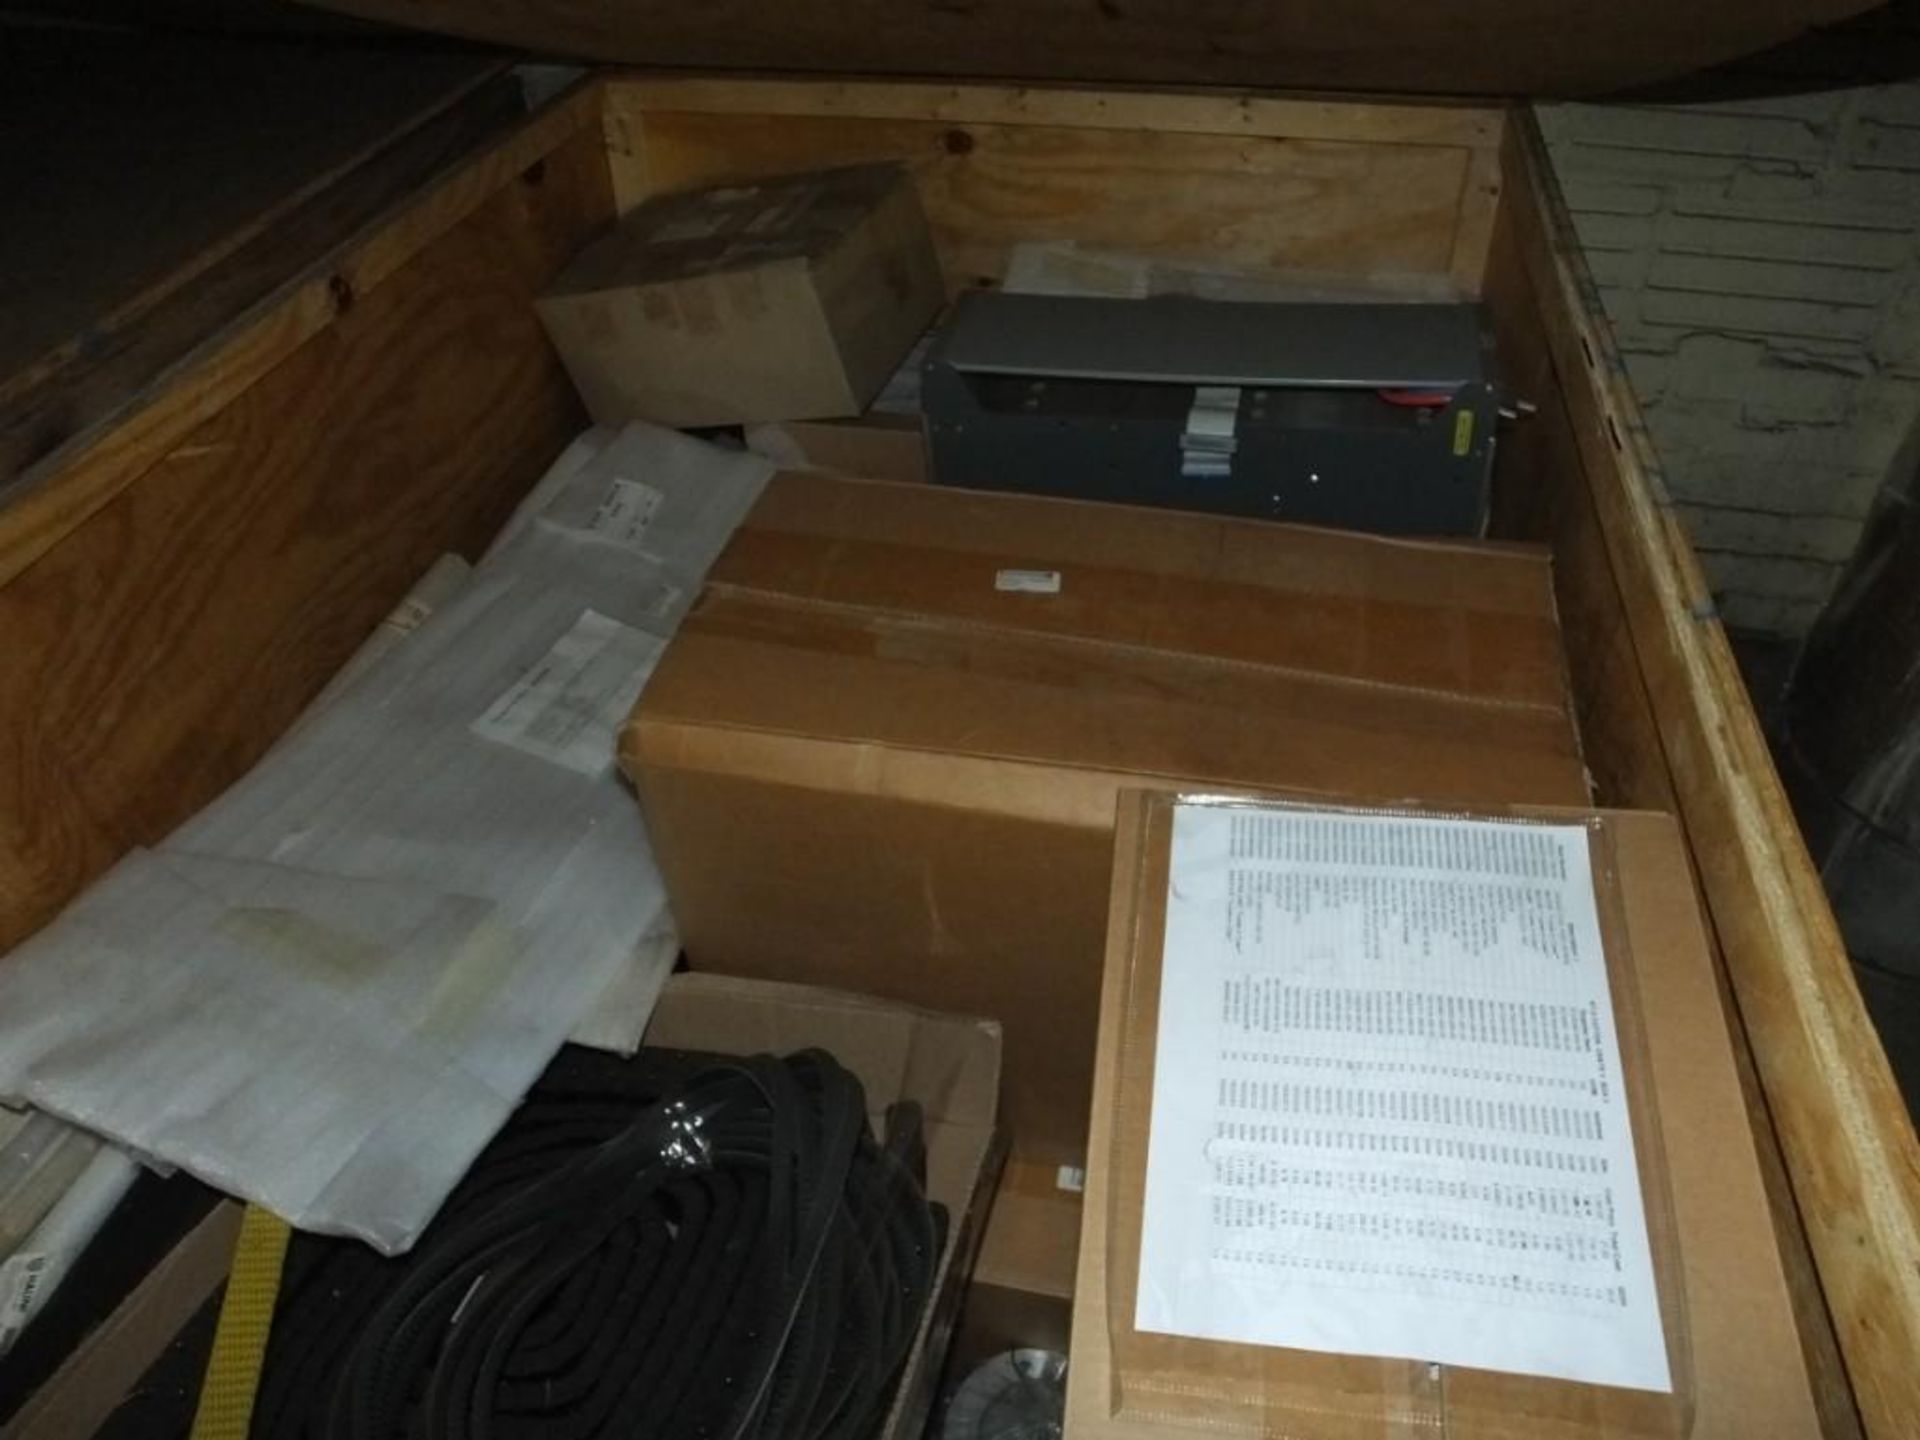 Hauni KT2 Spare Parts Crate with Approx. 150 Line Items and Over 500 Parts